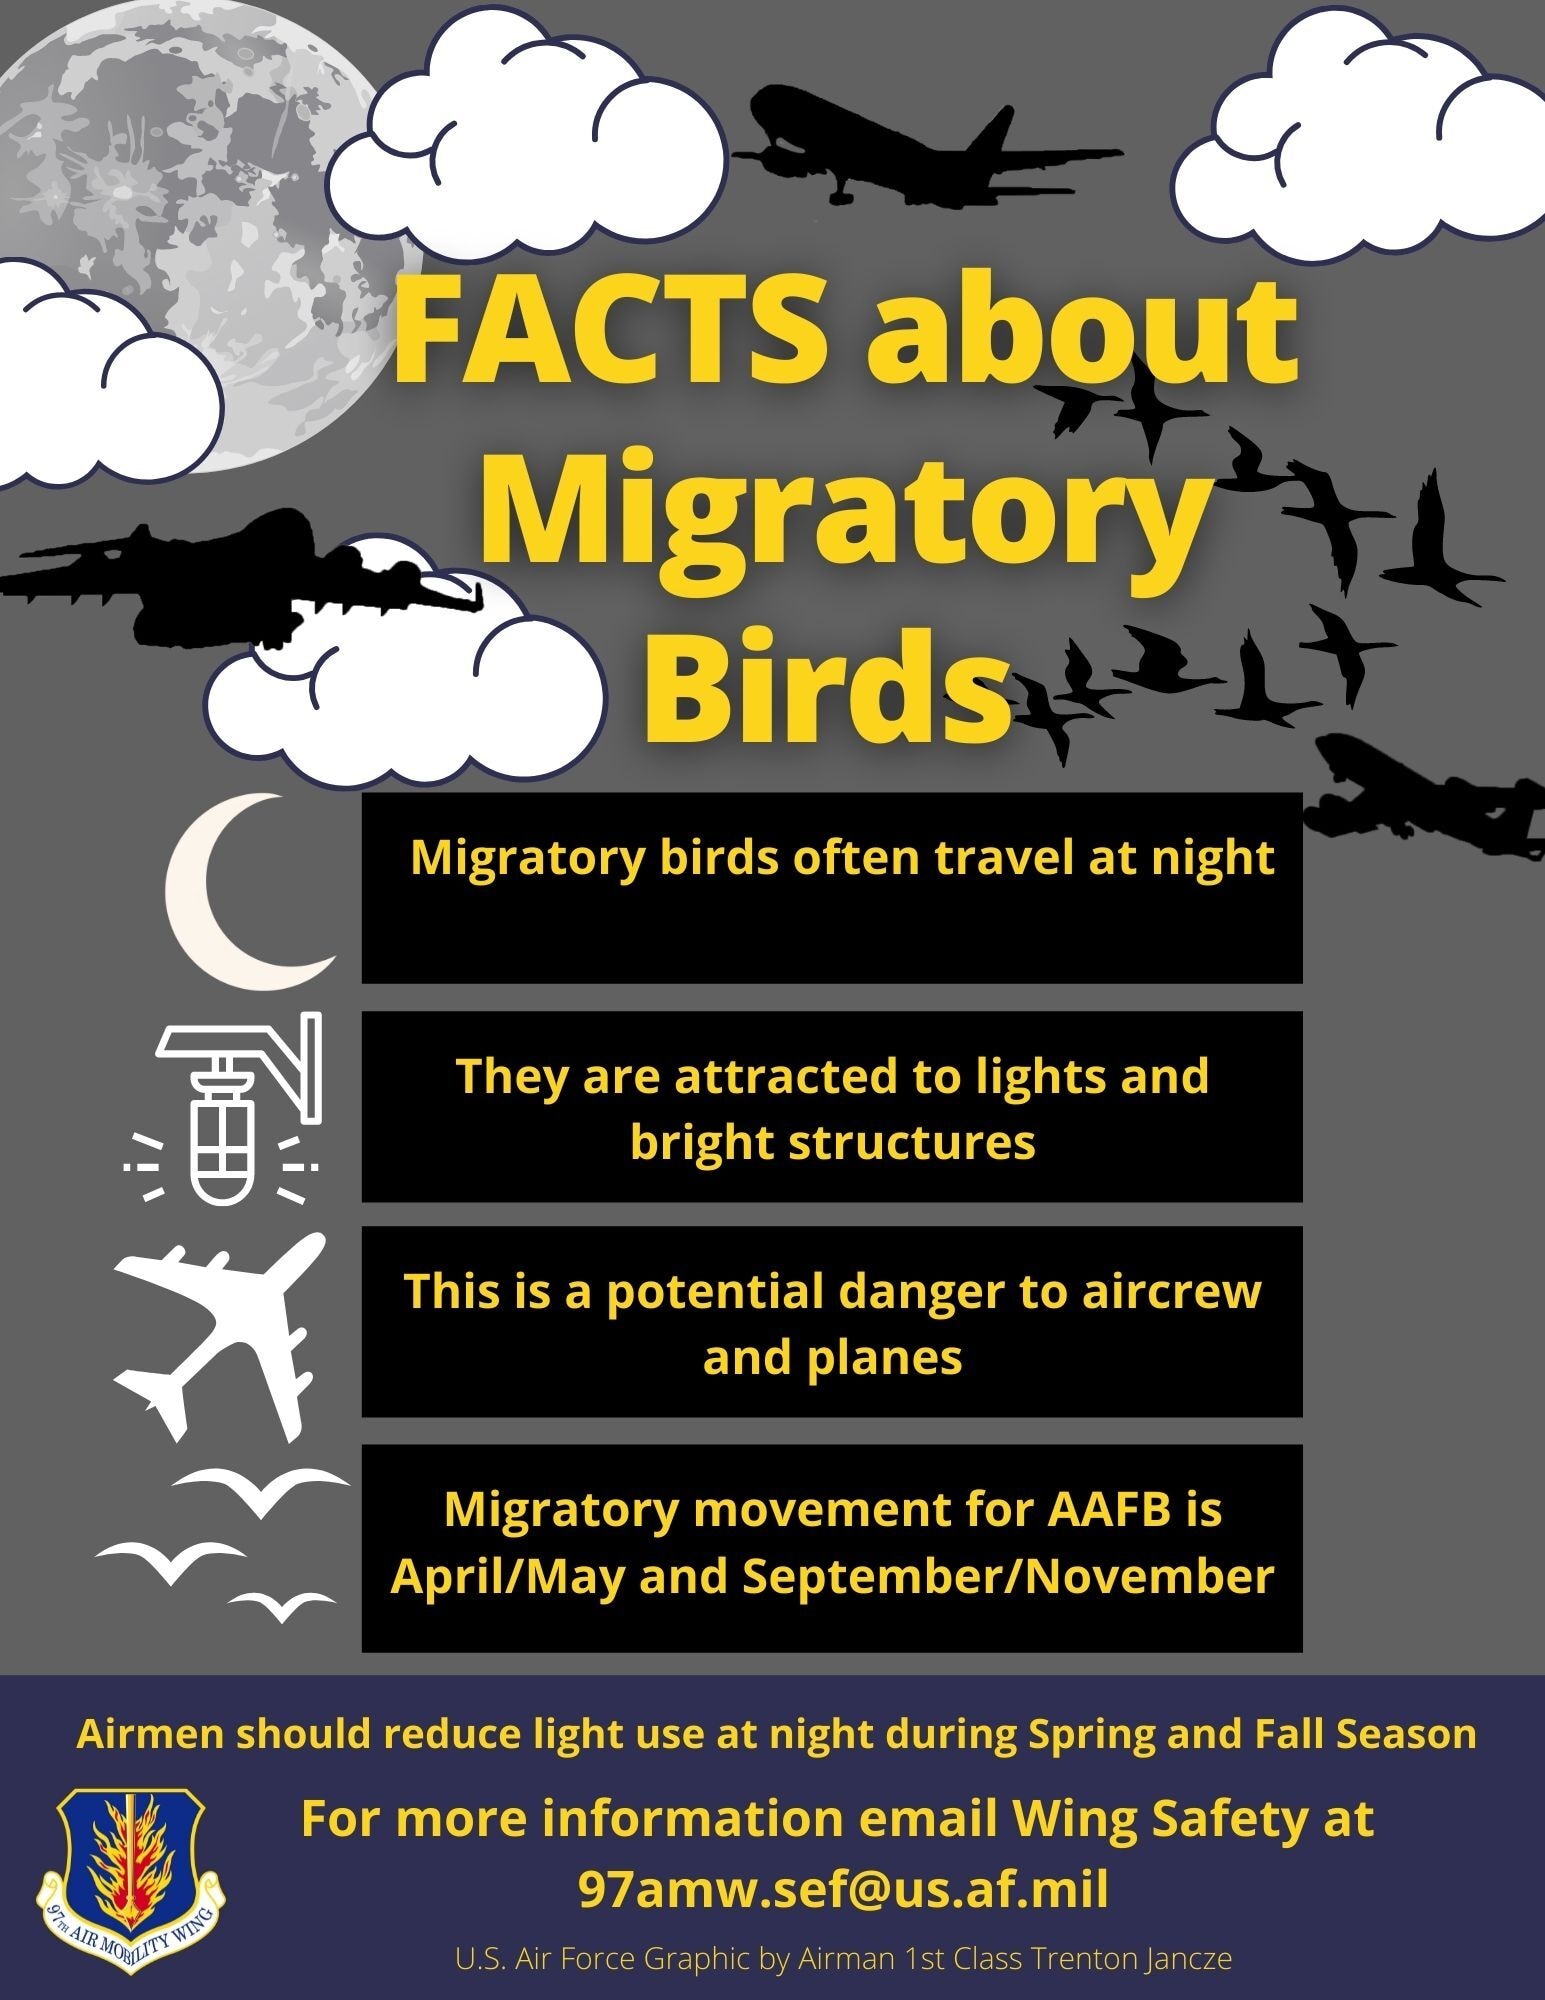 Migratory birds often move to and from Altus Air Force Base during the months of April/May and September/November. Airmen should reduce light use at night during these months to decrease potential danger to aircrew and planes. (U.S. Air Force graphic by Airman 1st Class Trenton Jancze)